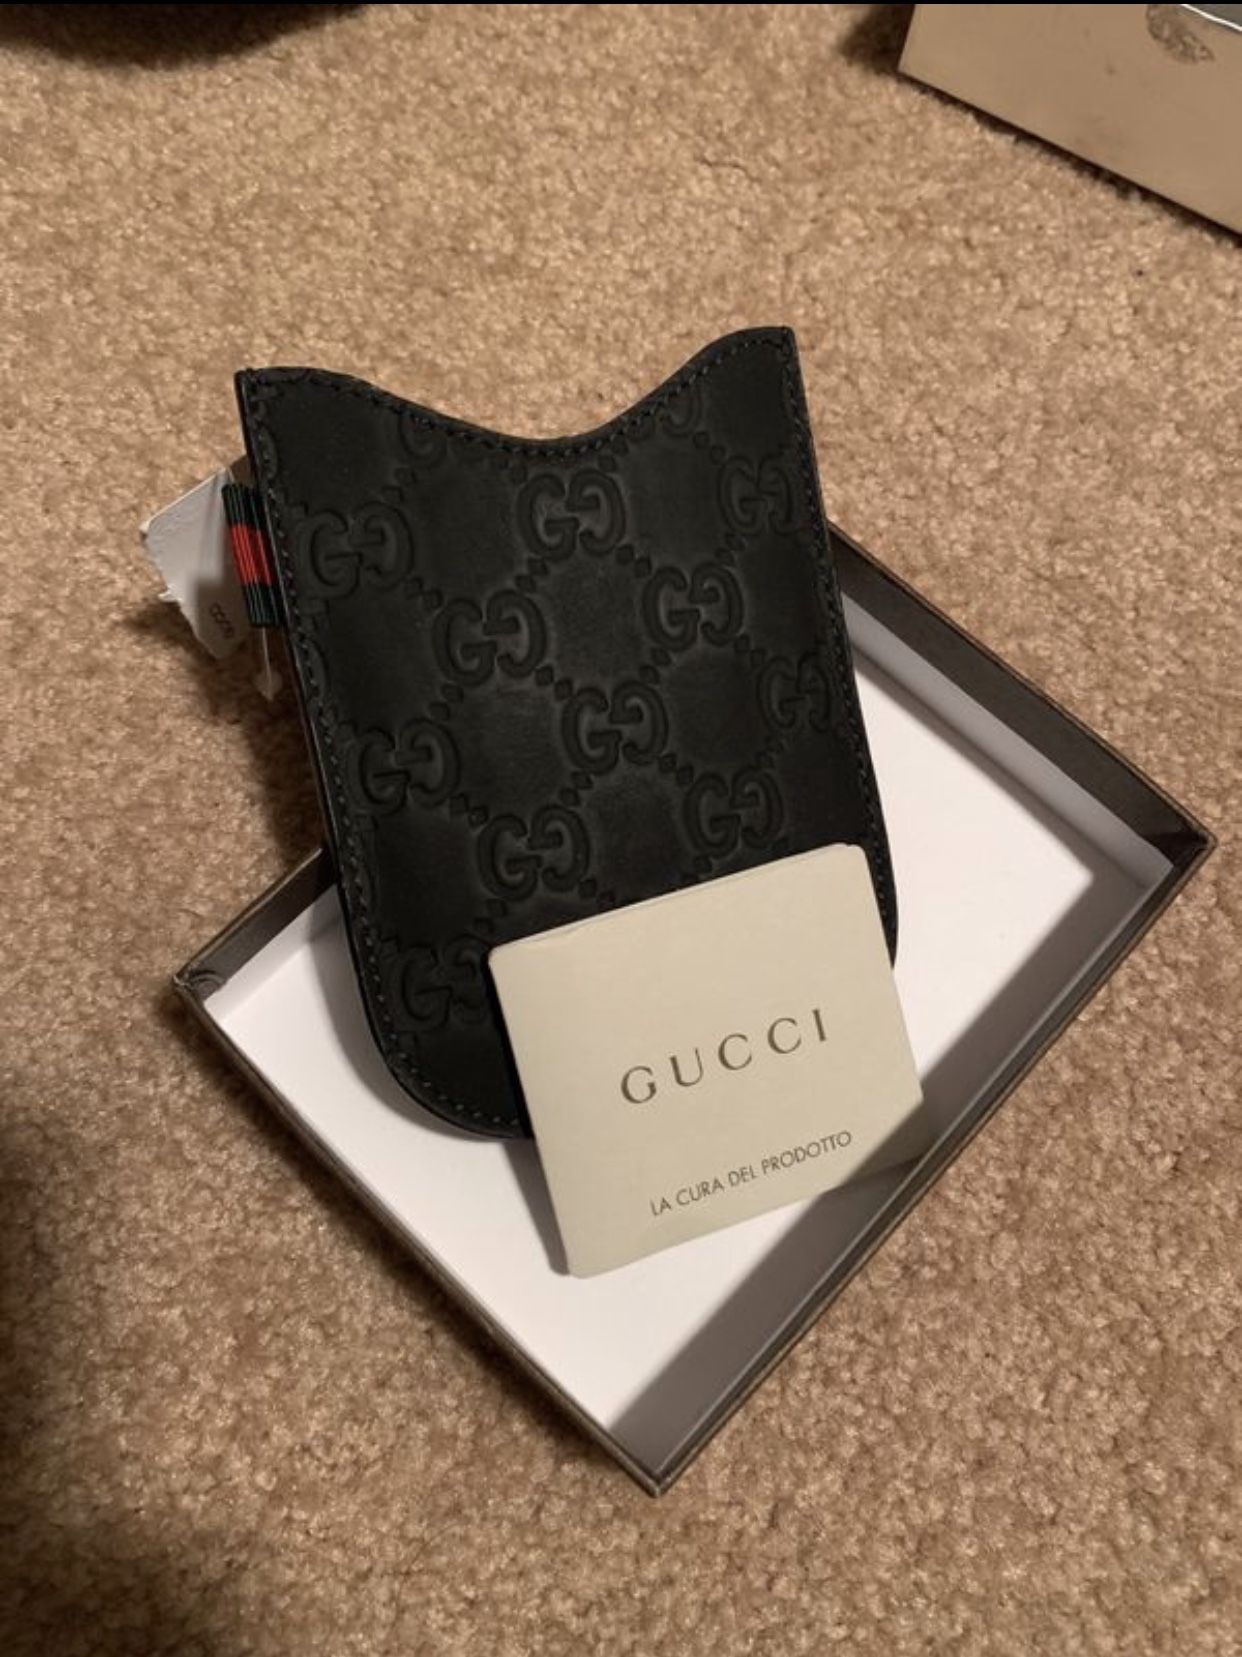 Gucci Men’s Wallet Cardholder - Leather - Brand New